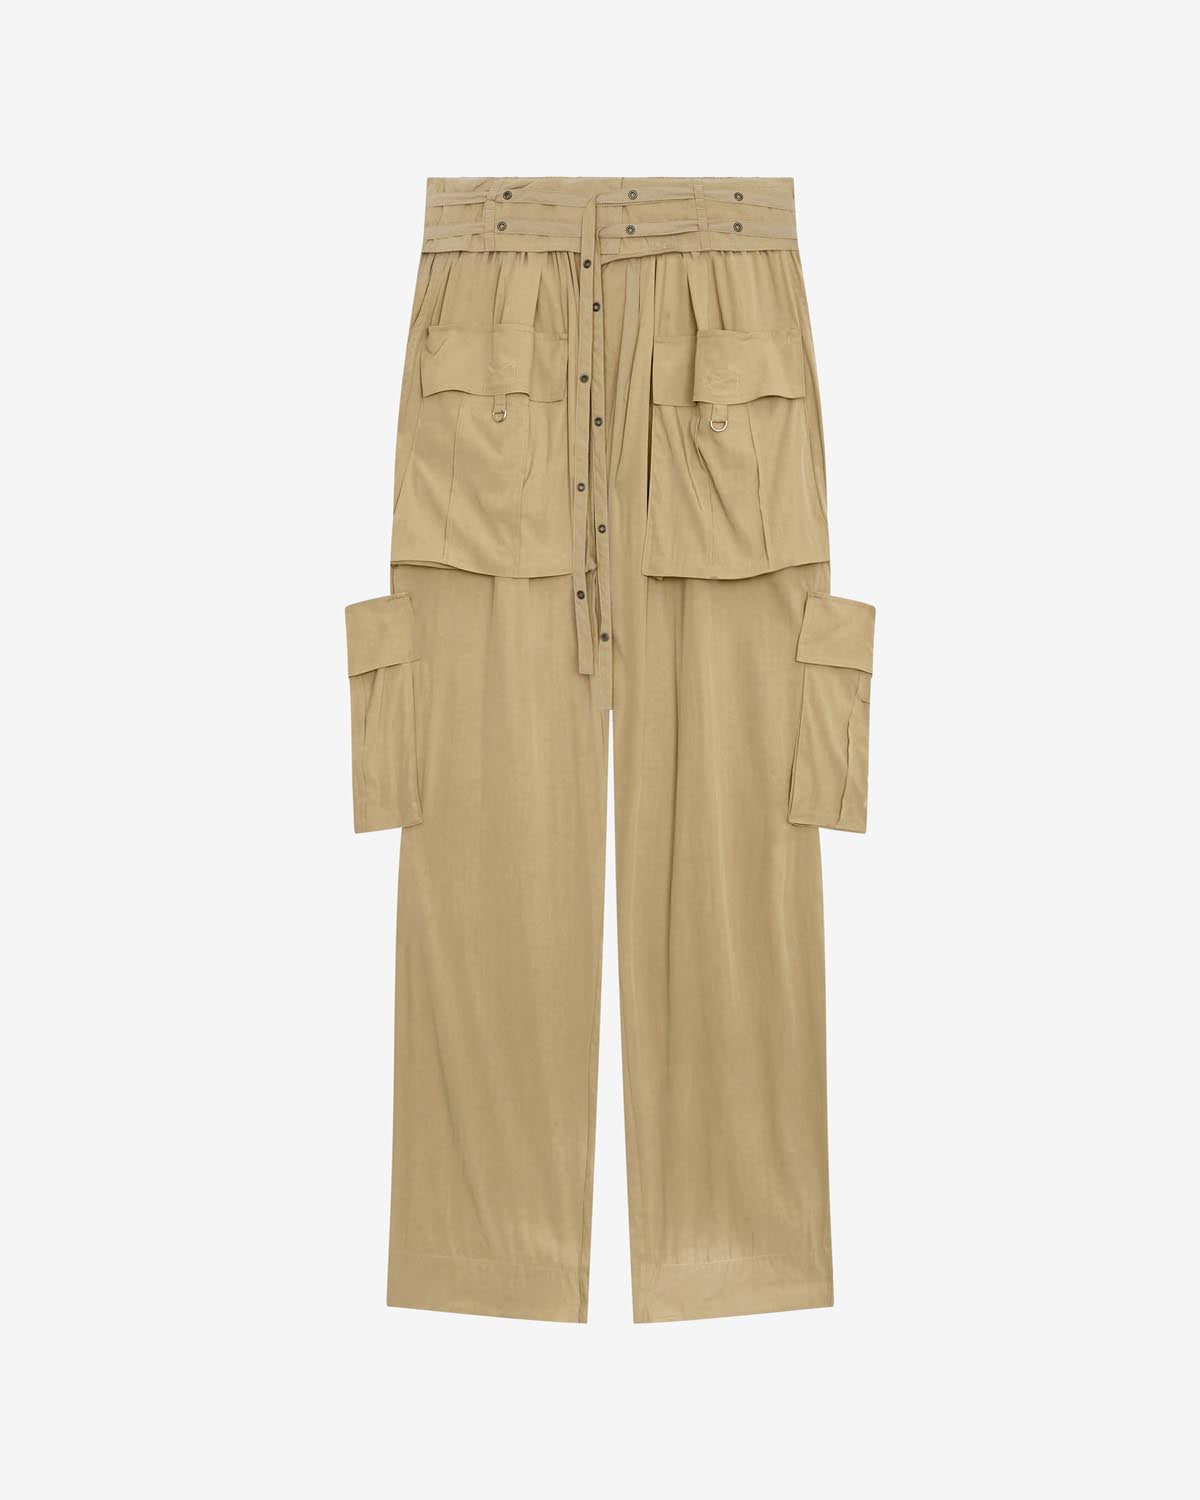 Pants and Shorts Woman | ISABEL MARANT Official Online Store